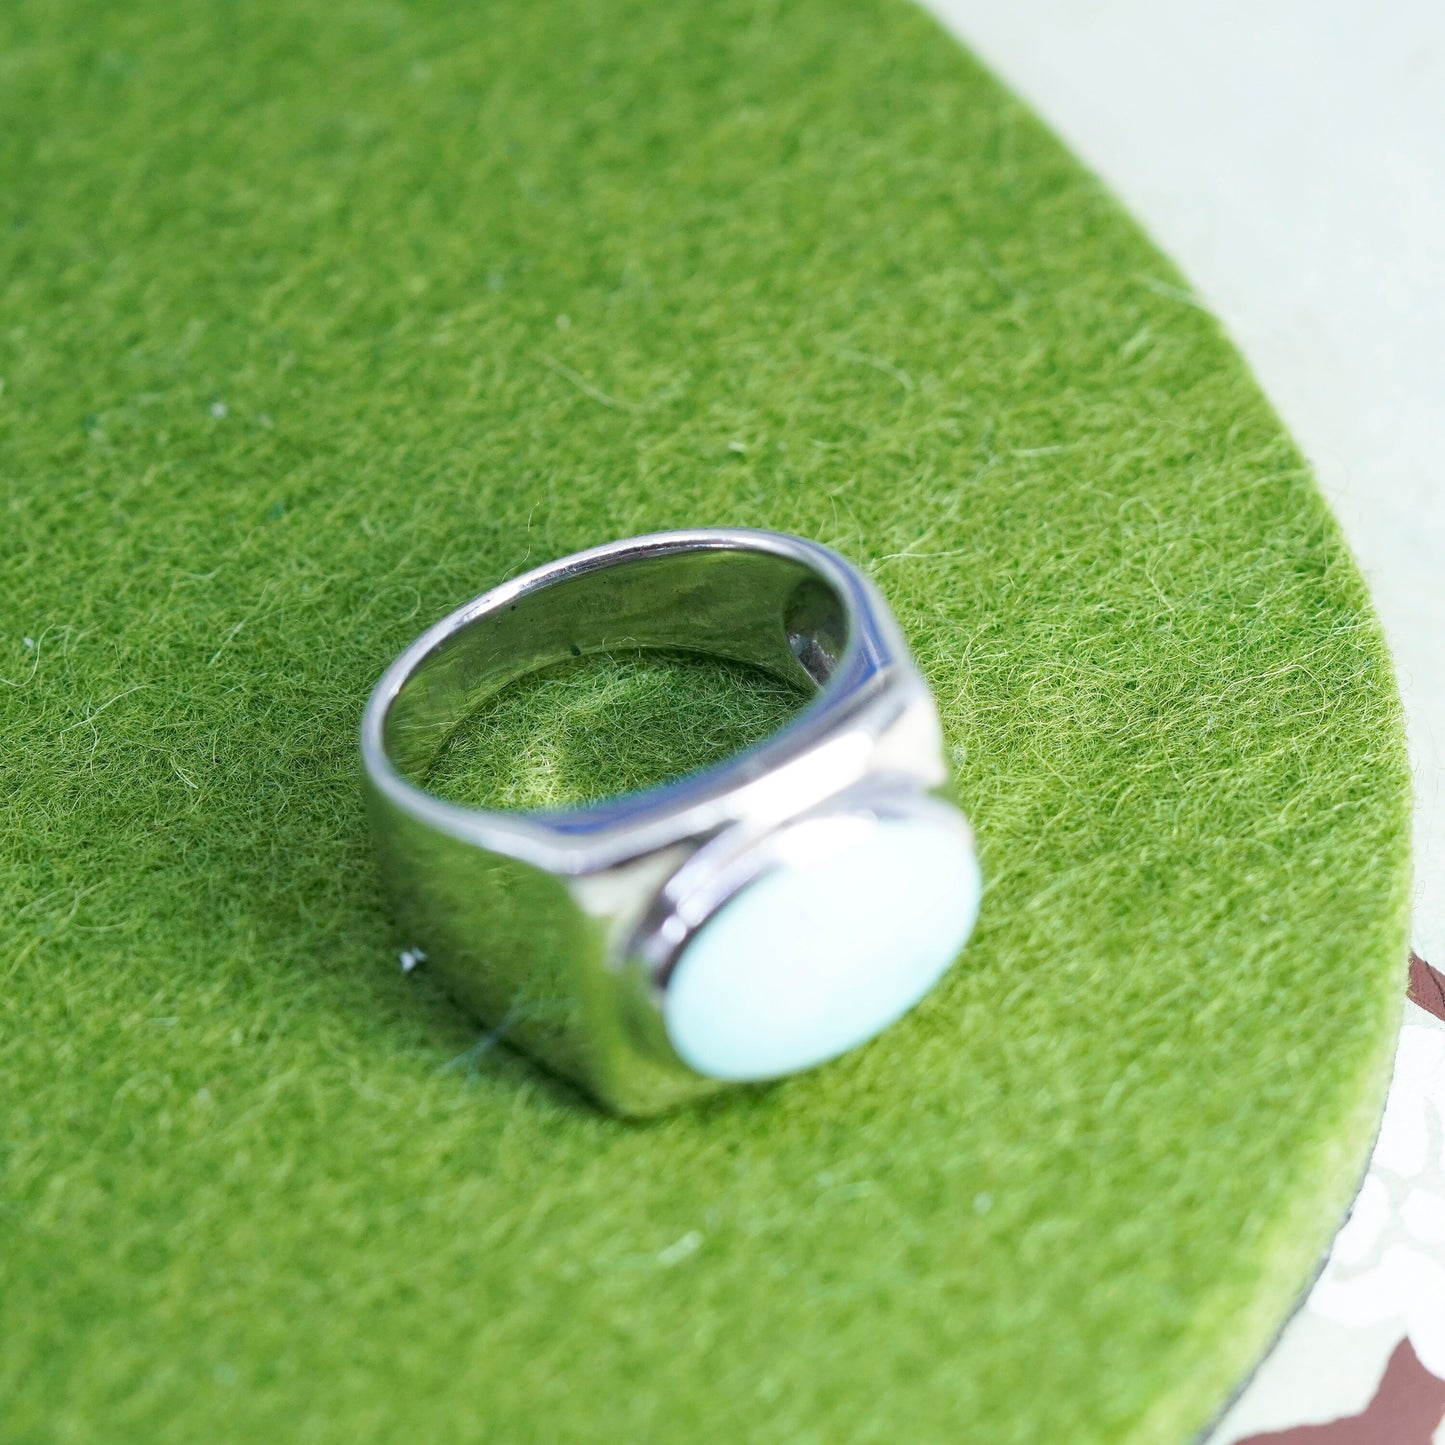 Size 7.25, vintage Sterling silver handmade ring, 925 band with turquoise inlay